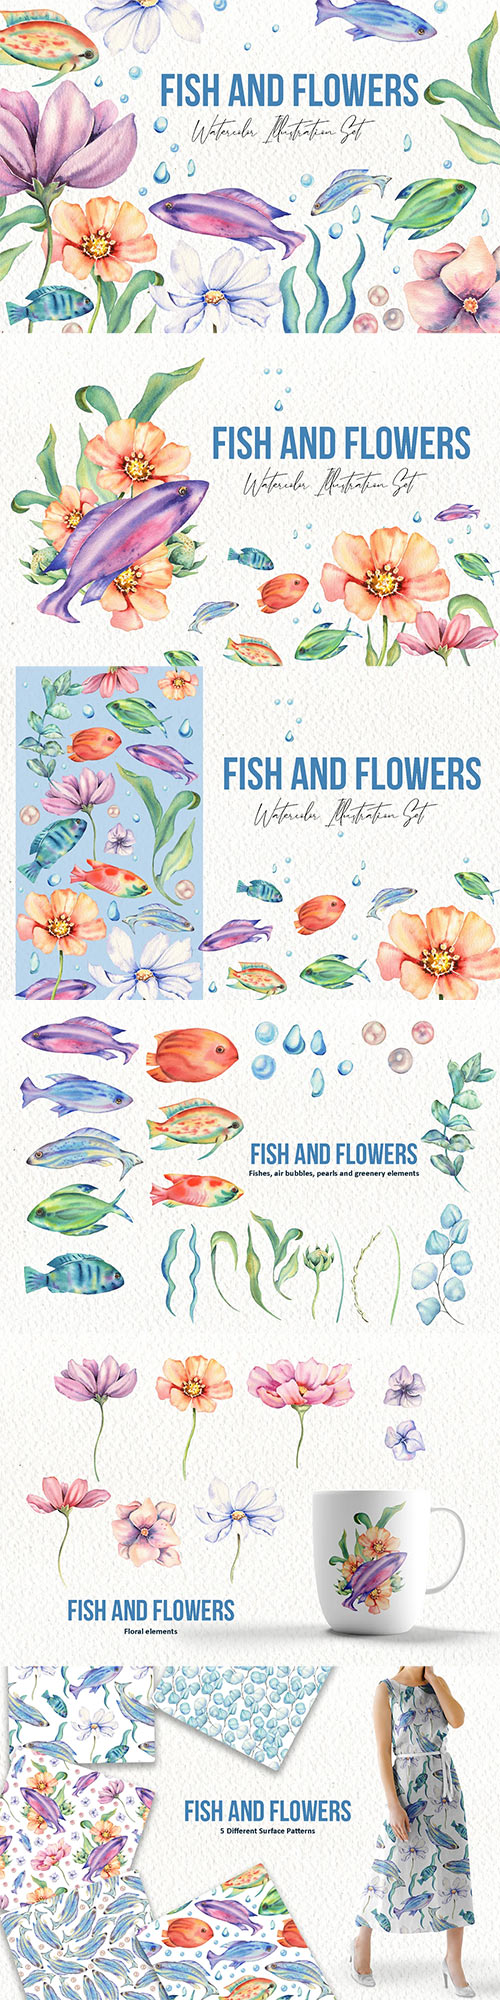 Fishes and Flowers Illustration Set 6364609